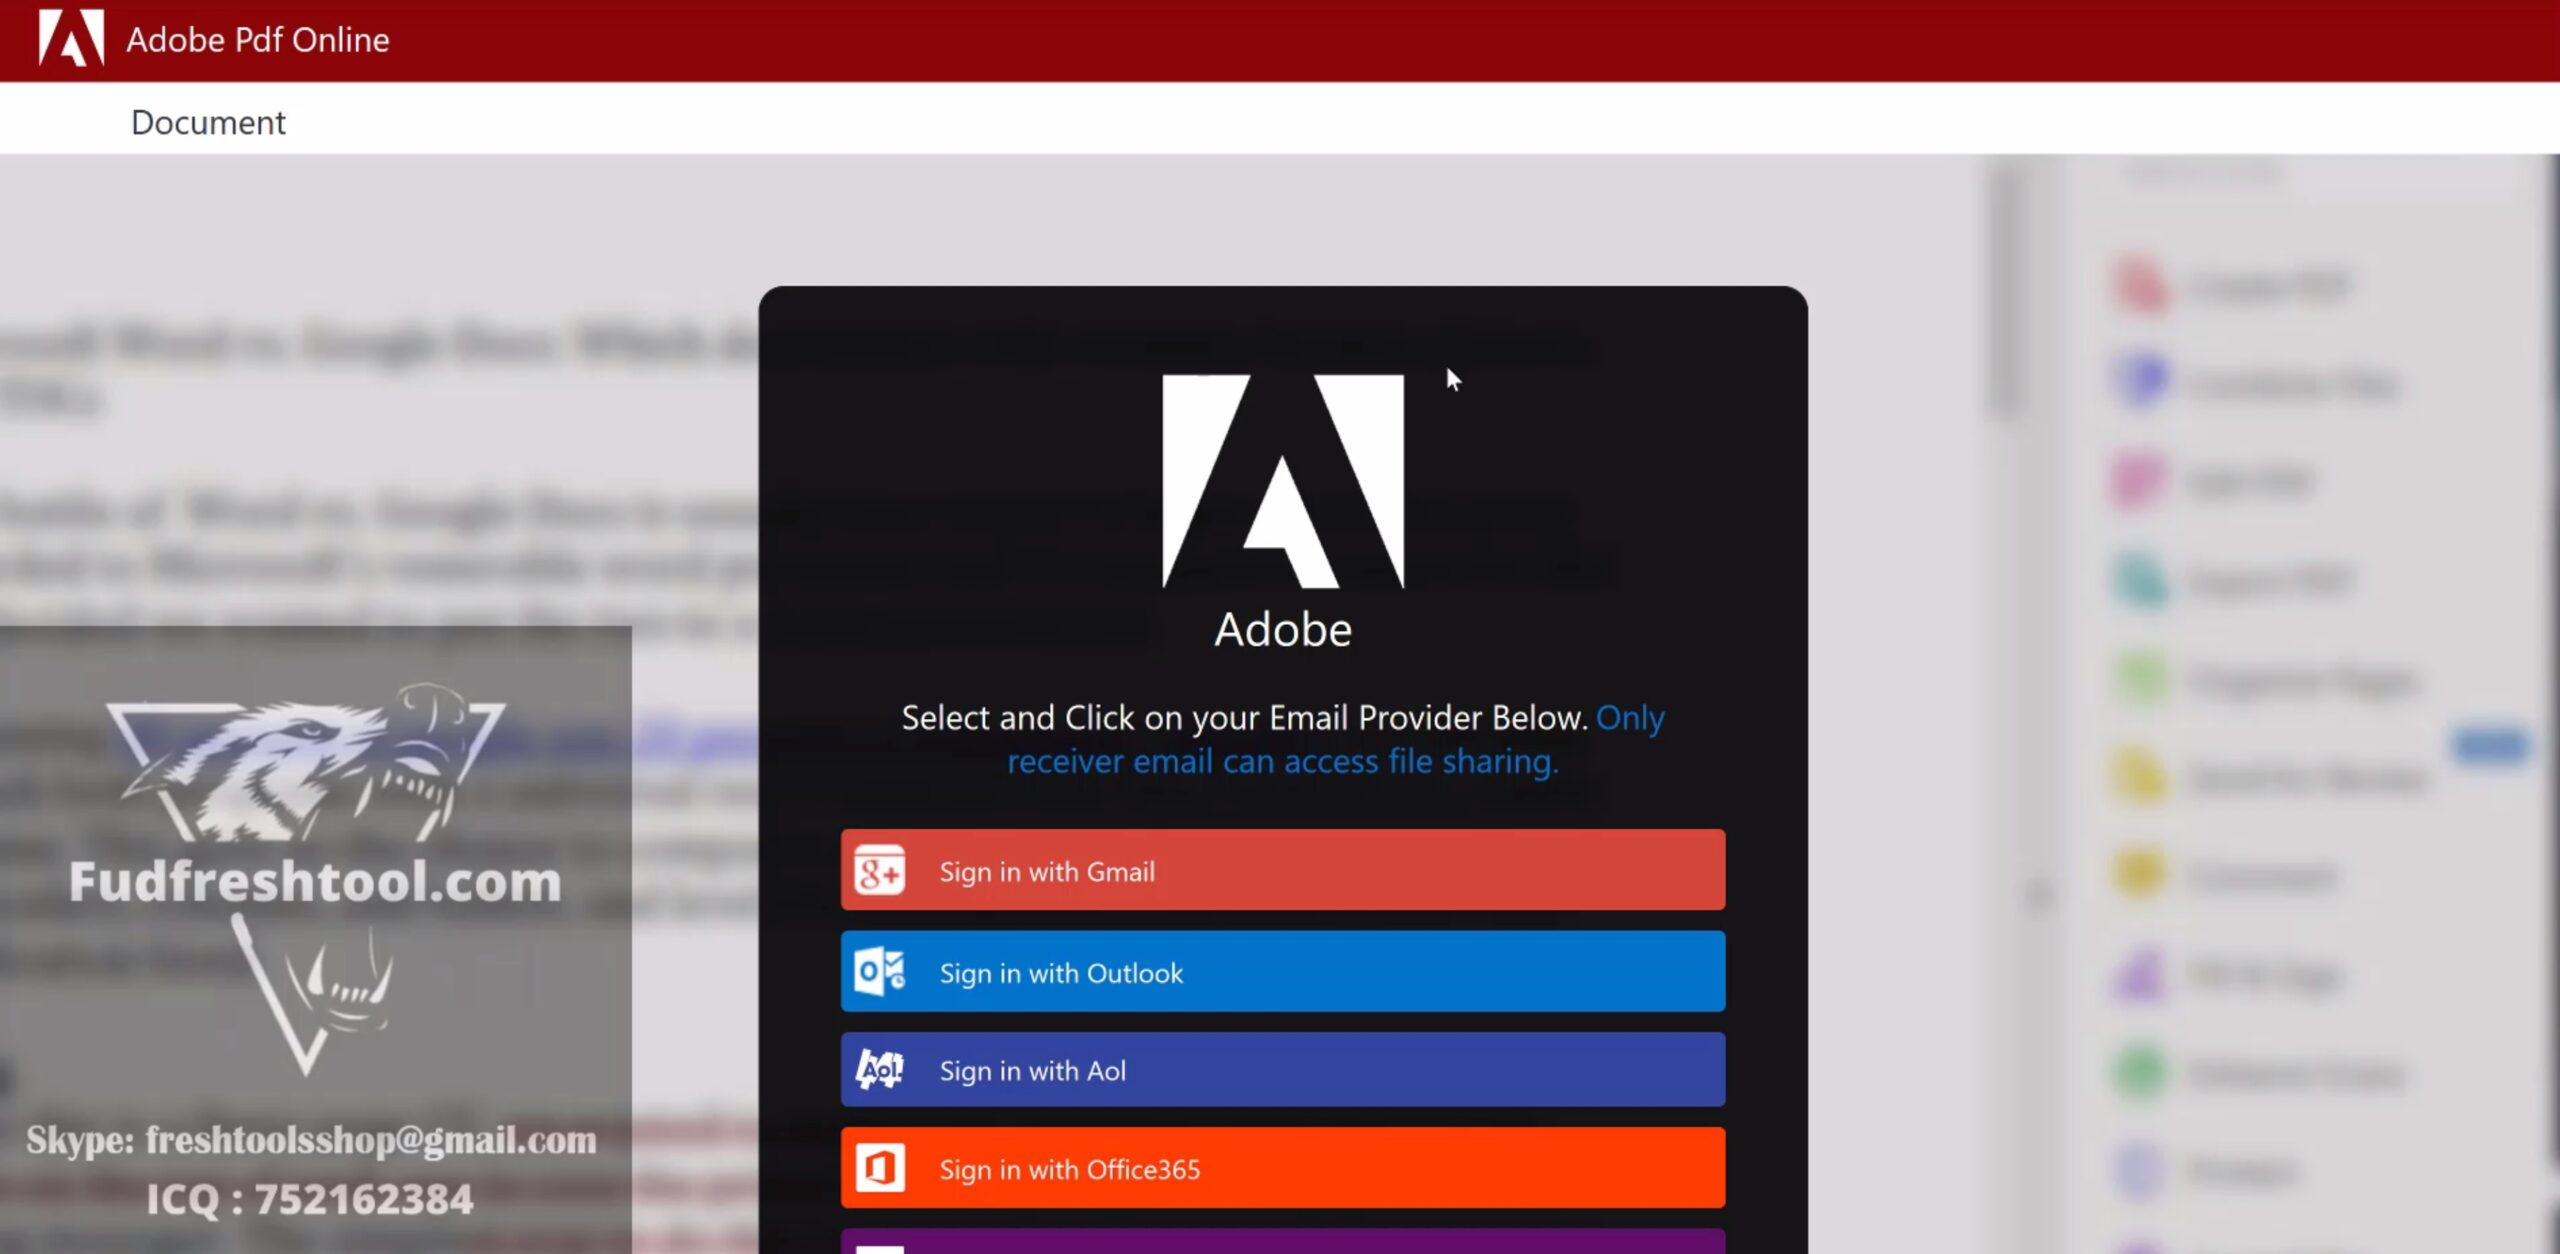 Adobe Scam Page 2021